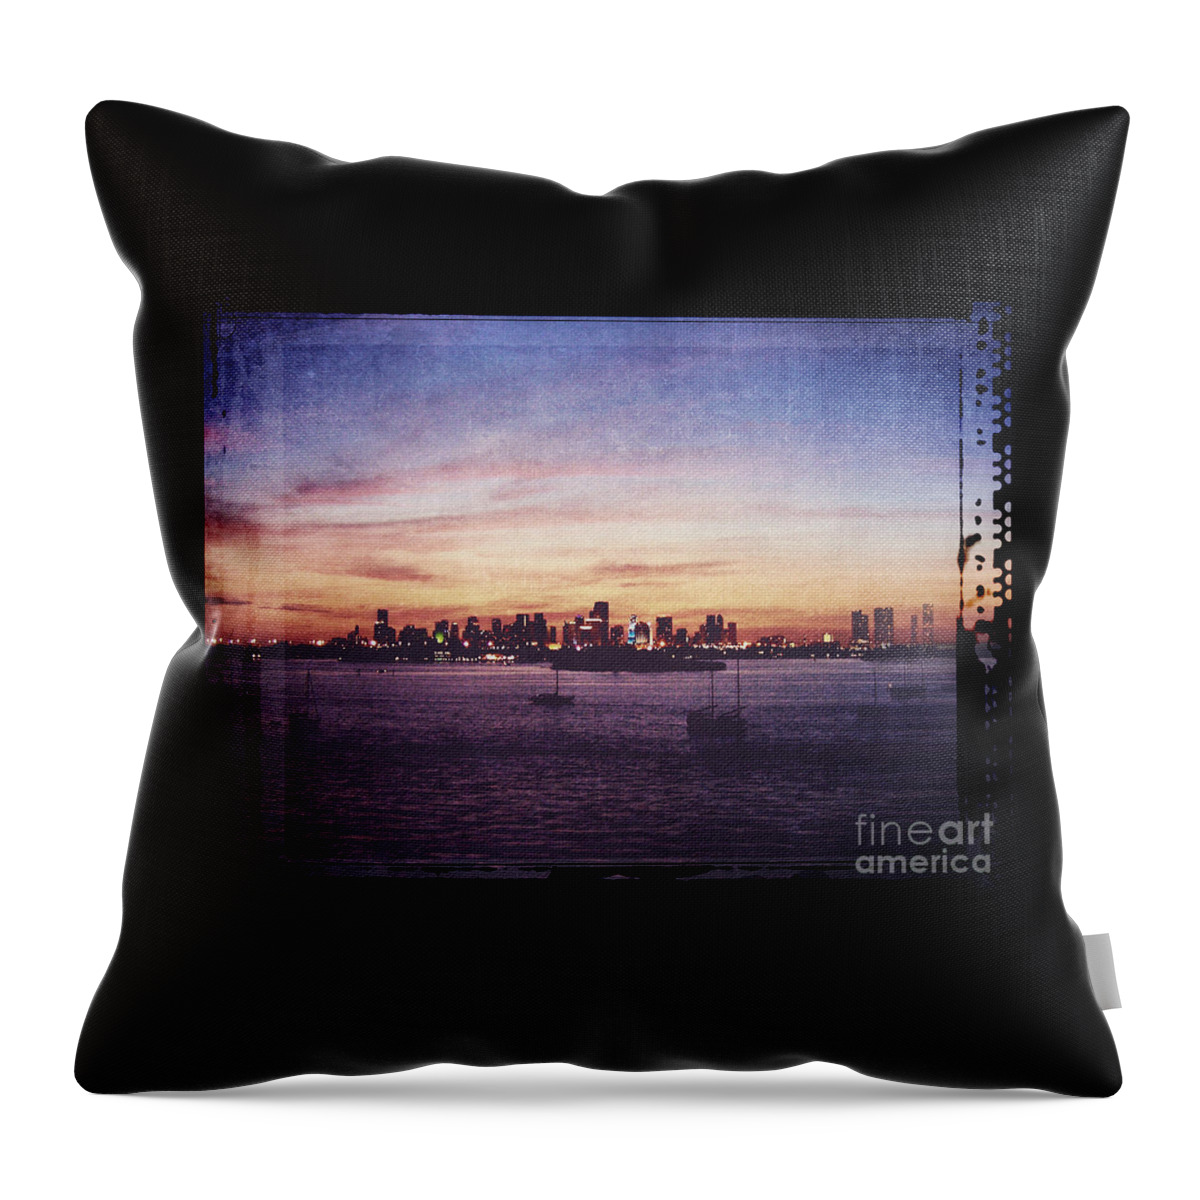 Florida Throw Pillow featuring the digital art Vintage Miami Sunset by Phil Perkins